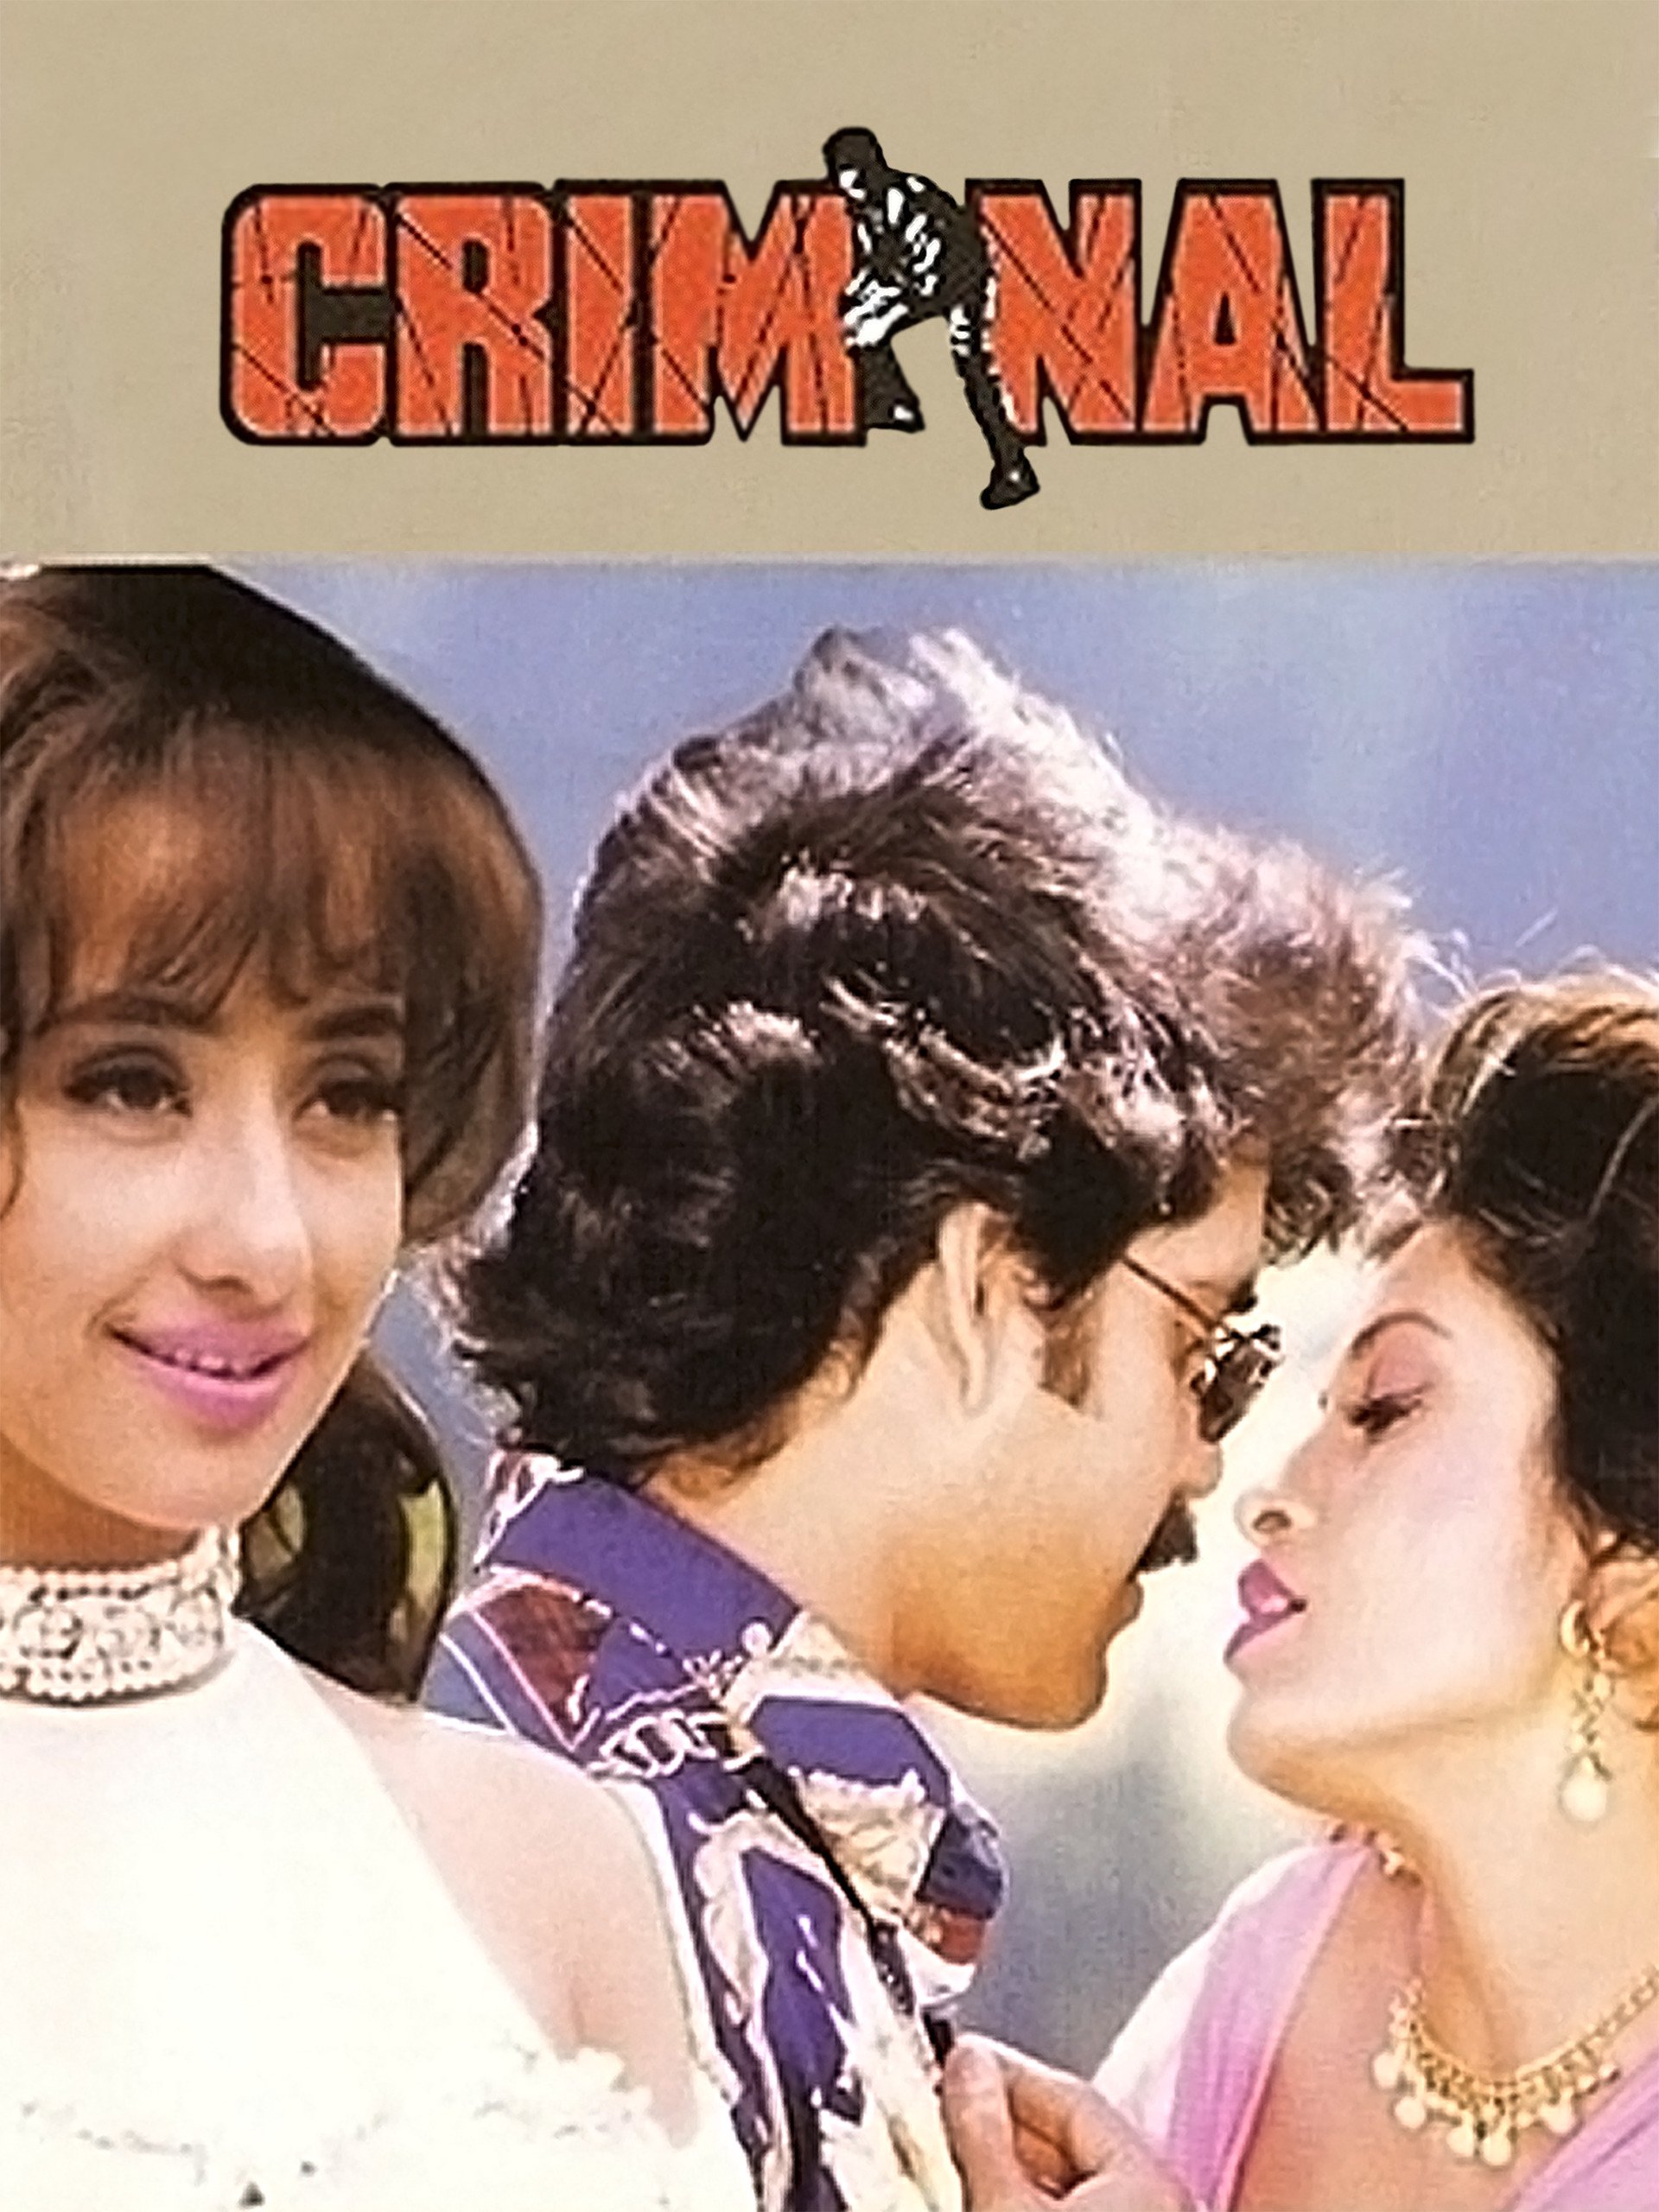 criminal-movie-review-release-date-songs-music-images